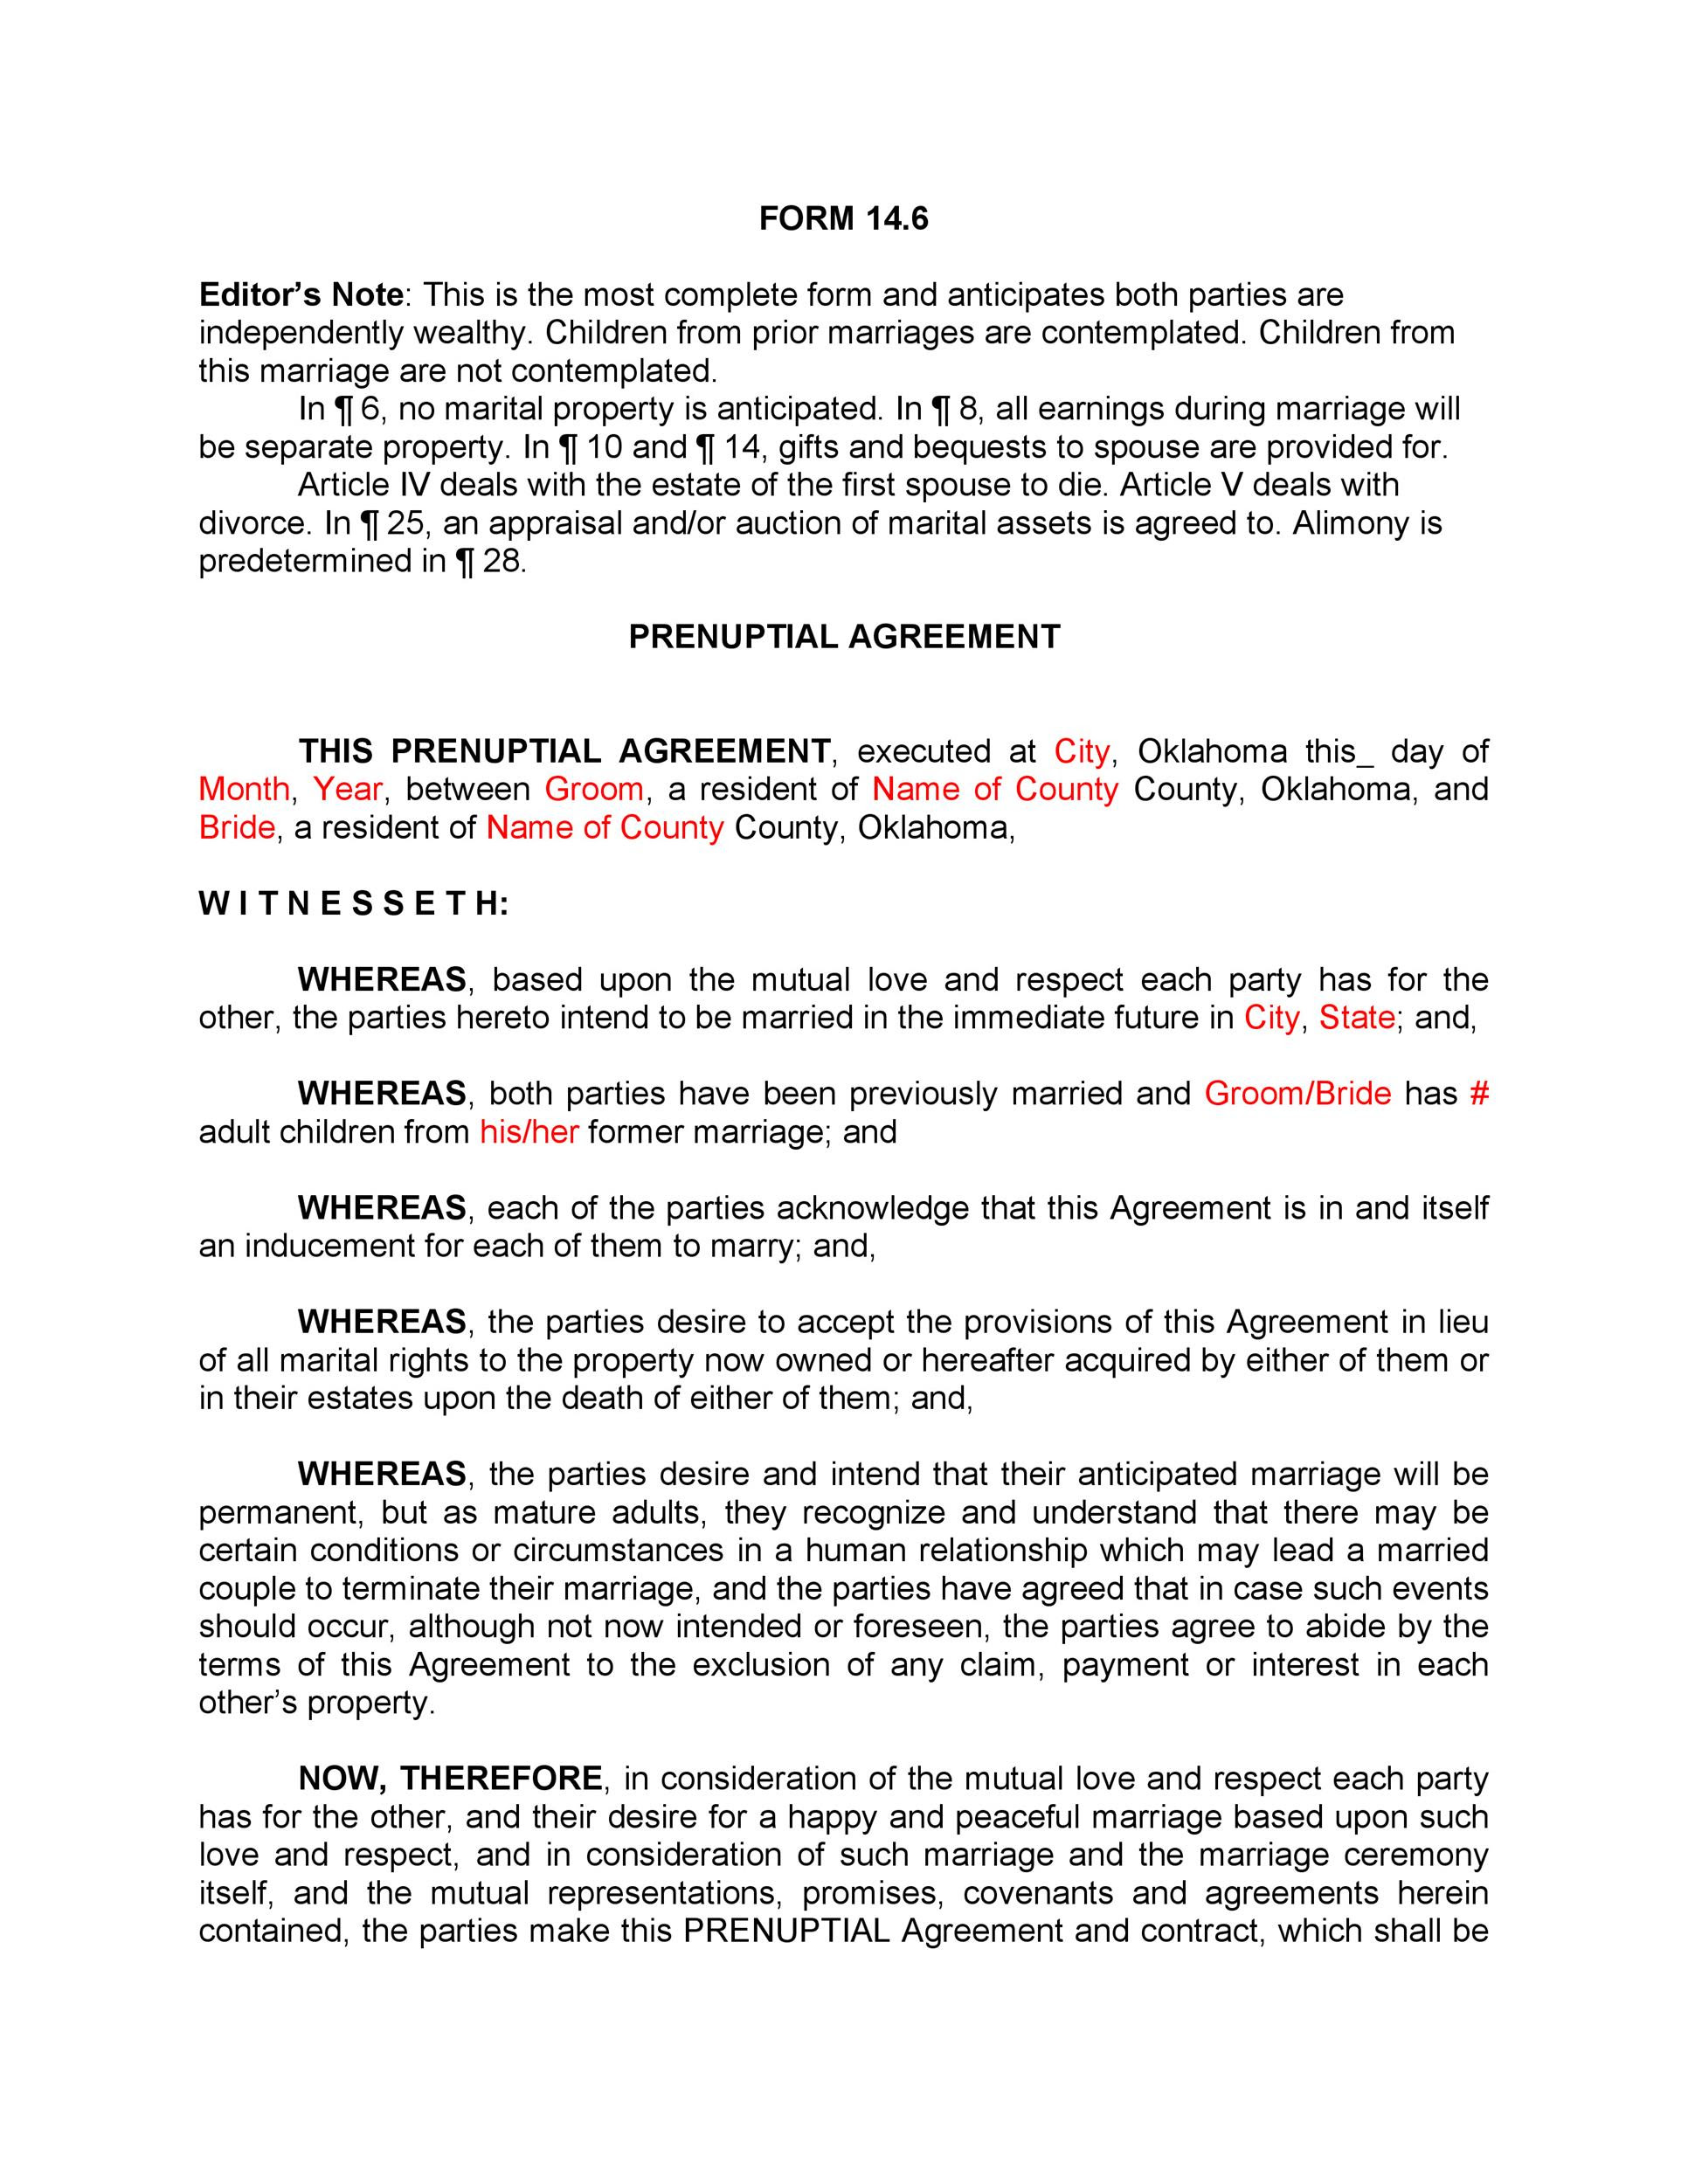 marriage-prenuptial-agreement-template-pdf-template